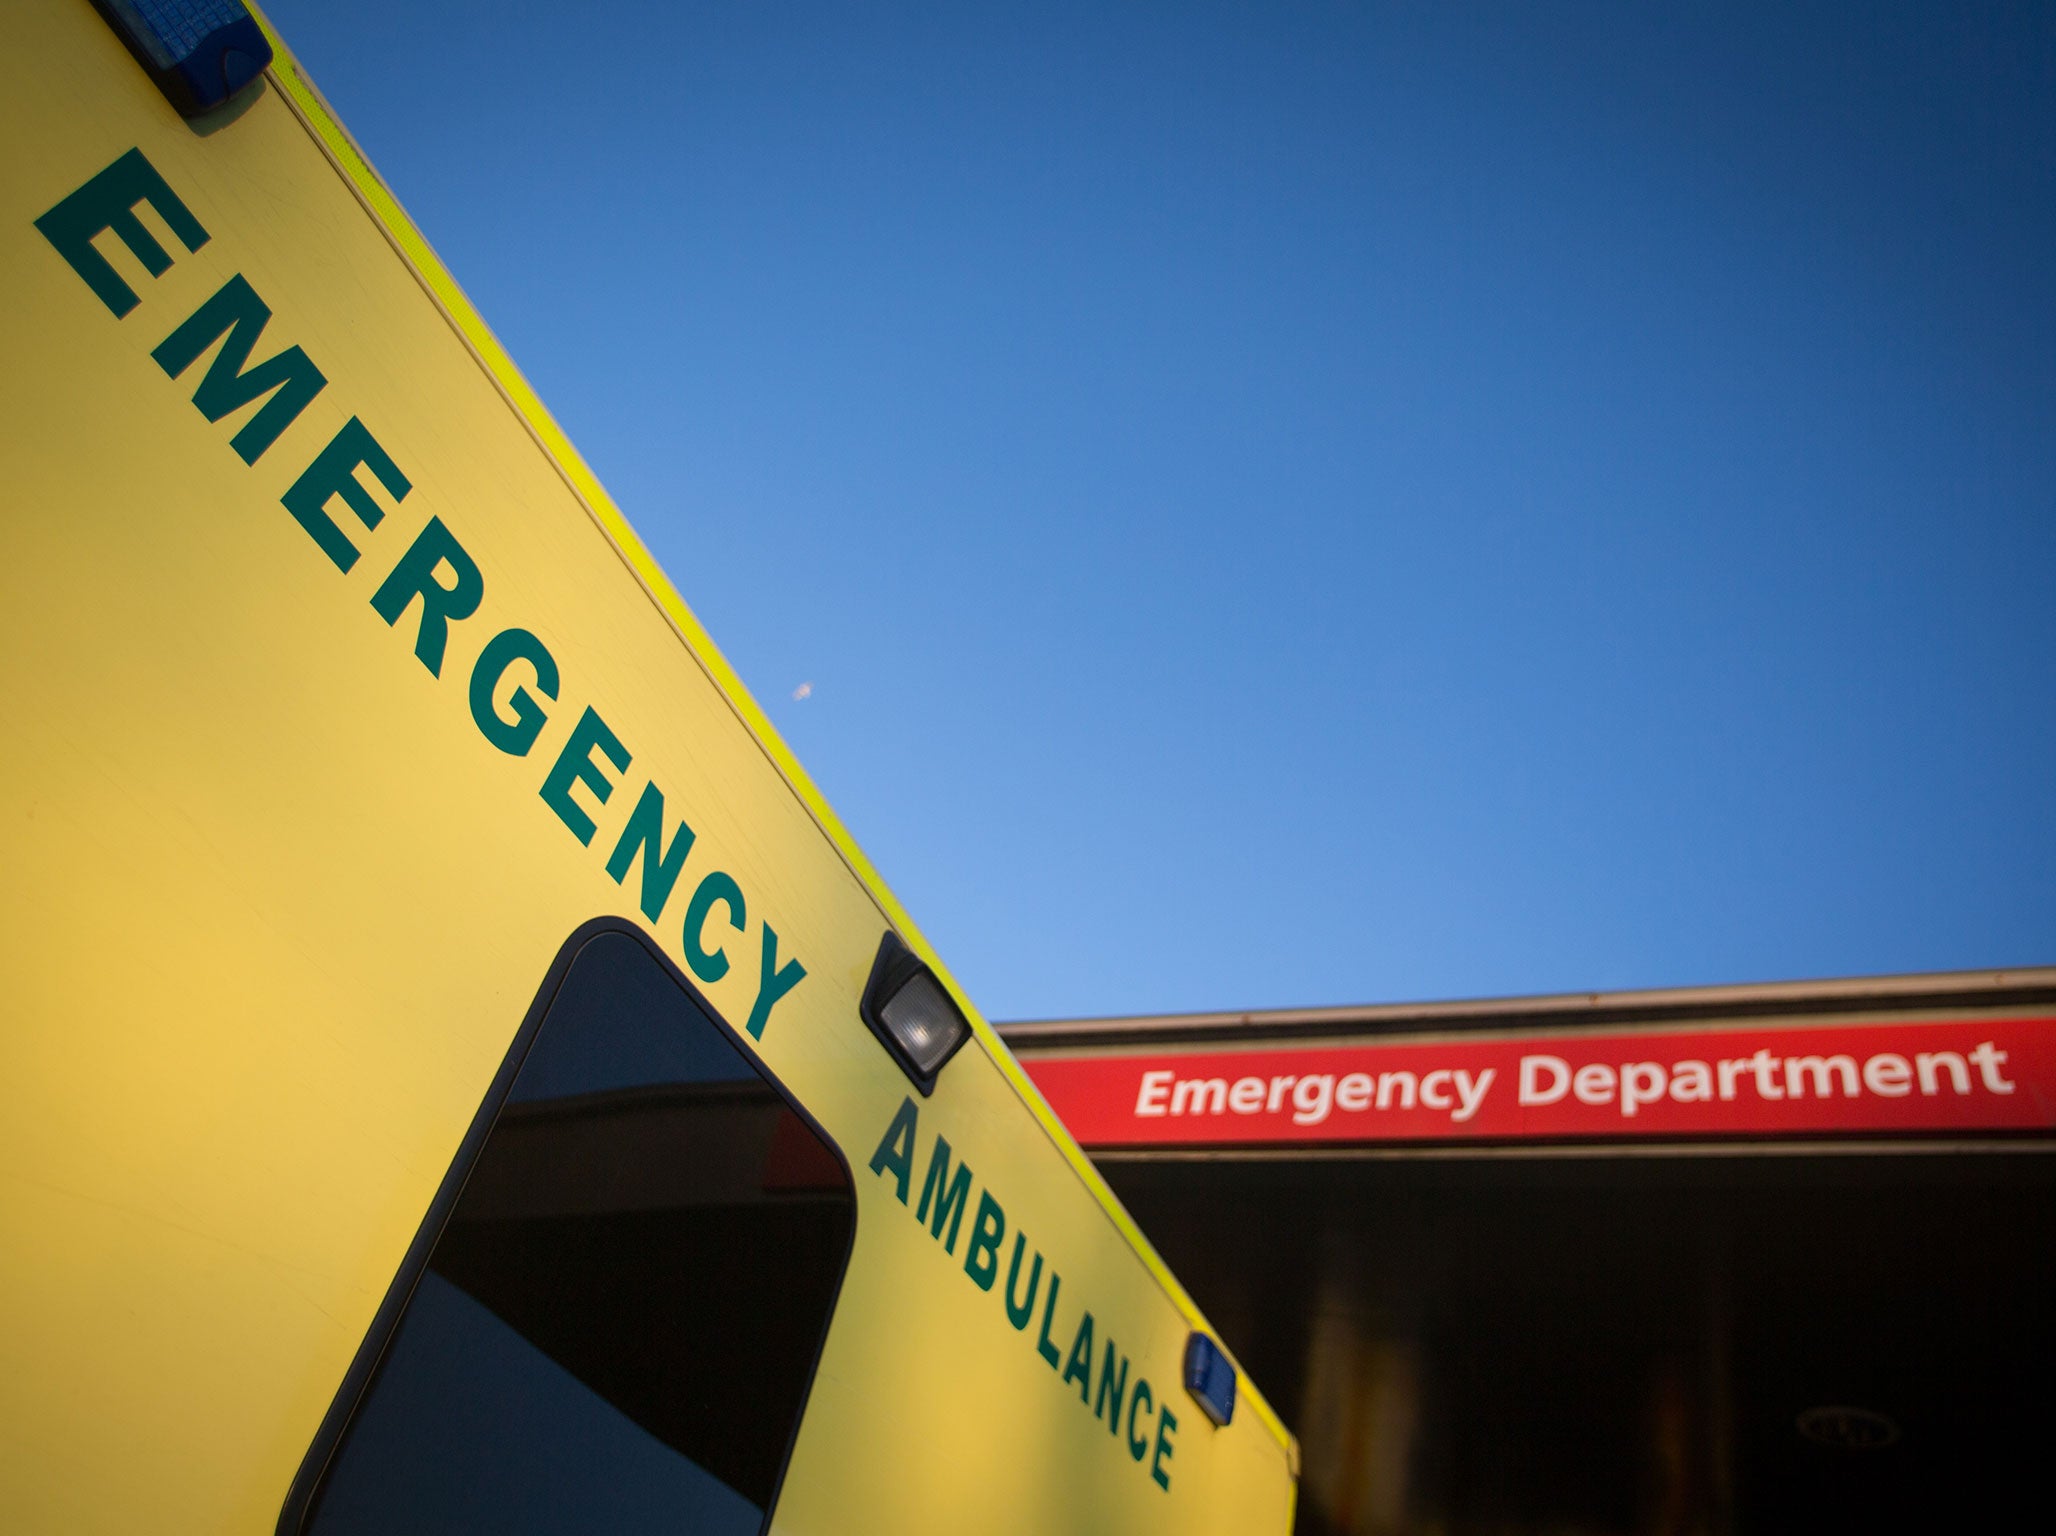 Alcohol is causing more A&E admissions, according to new figures